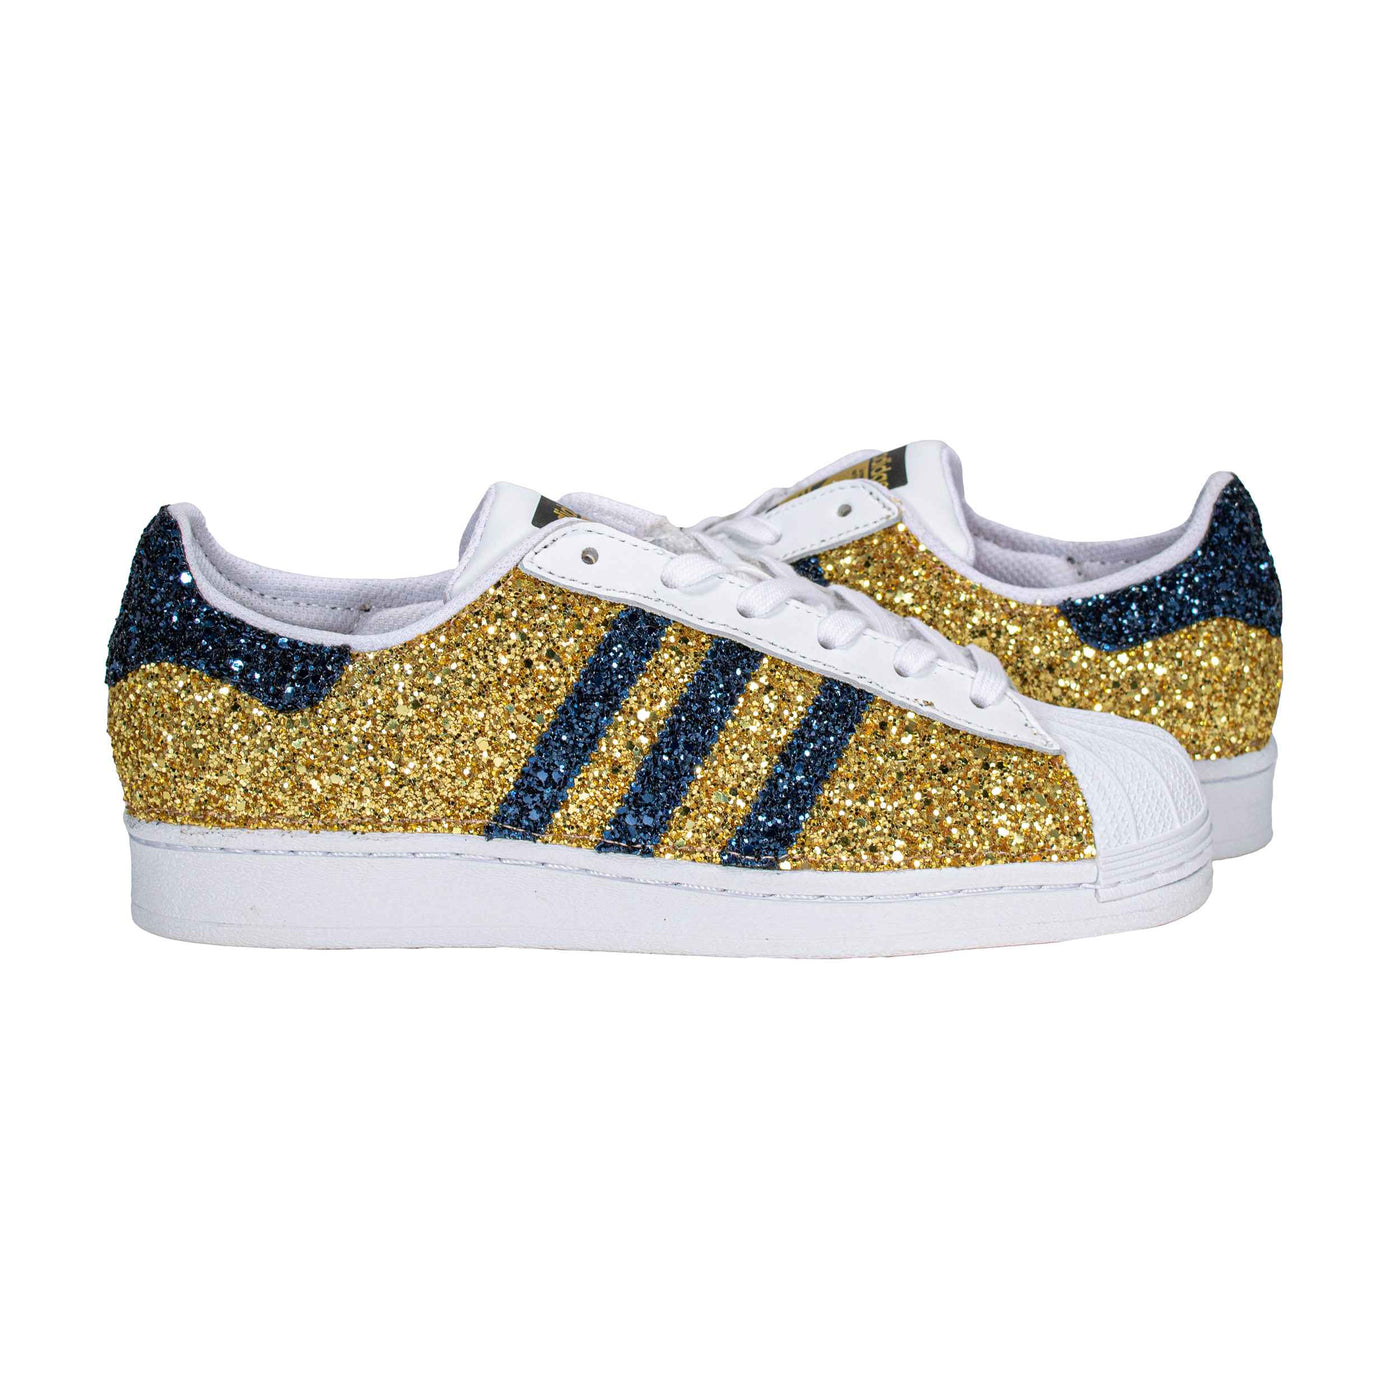 ADIDAS SUPERSTAR PERSONALIZZATE LAKHDAR